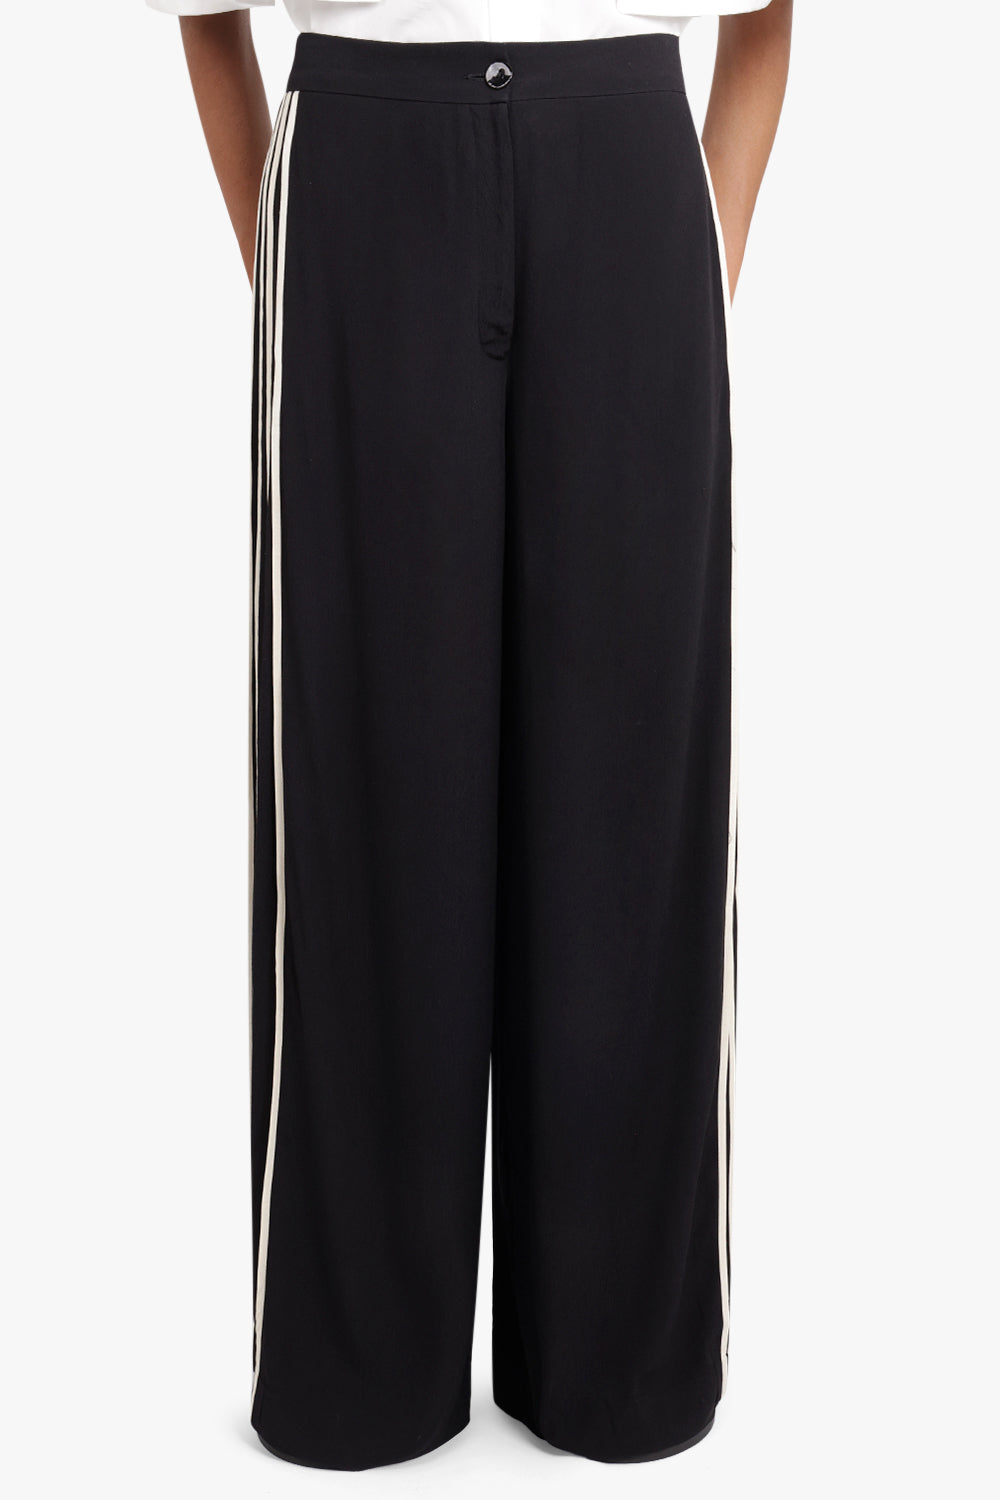 BODICE RTW CLASSIC TROUSERS WITH SIDE BINDING DETAILS | BLACK